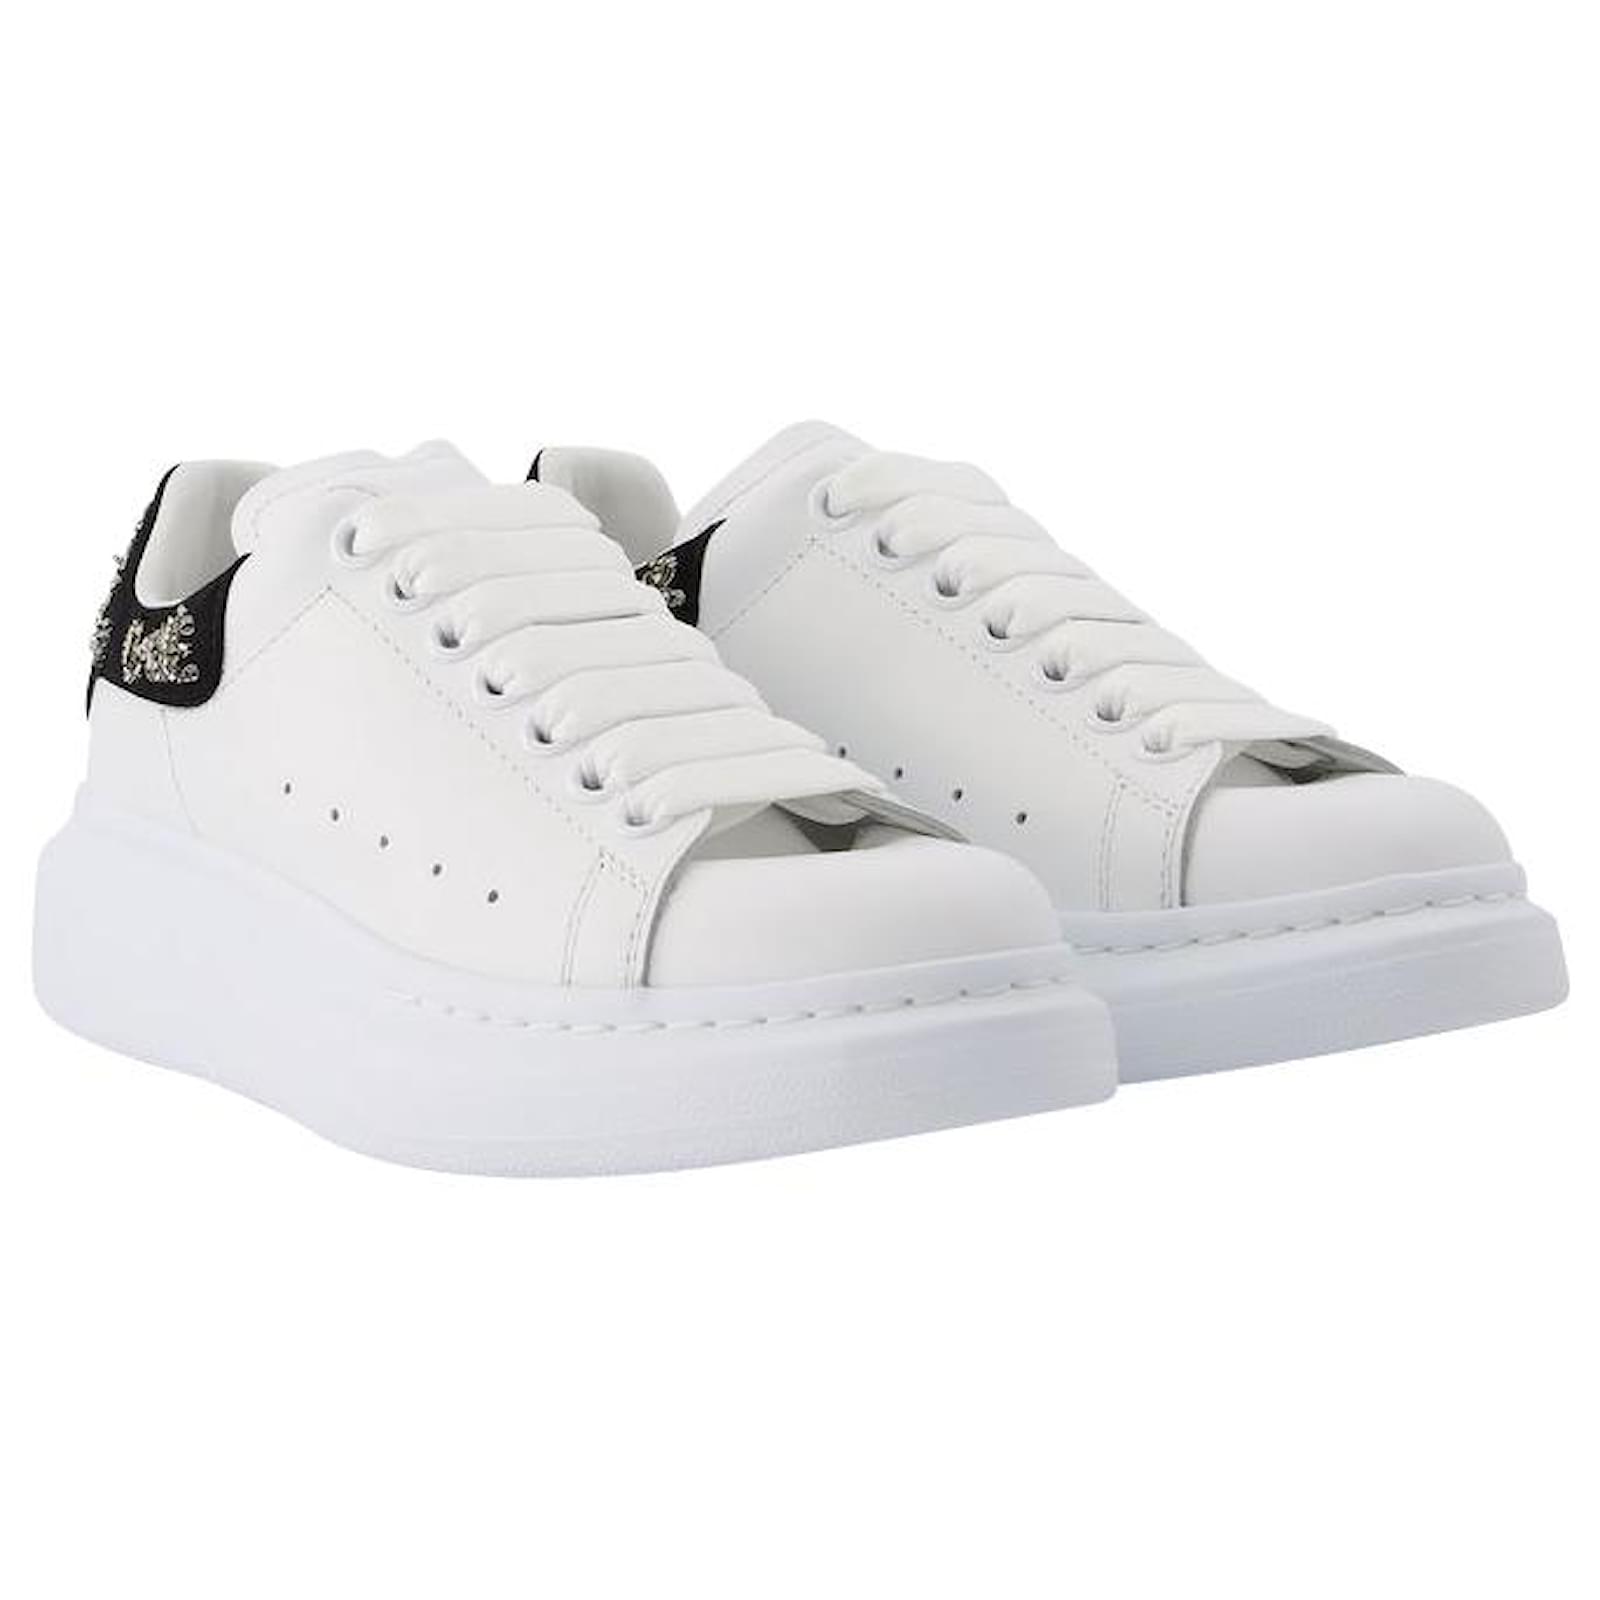 Alexander Mcqueen Oversize sneakers in Black and White Leather Multiple ...